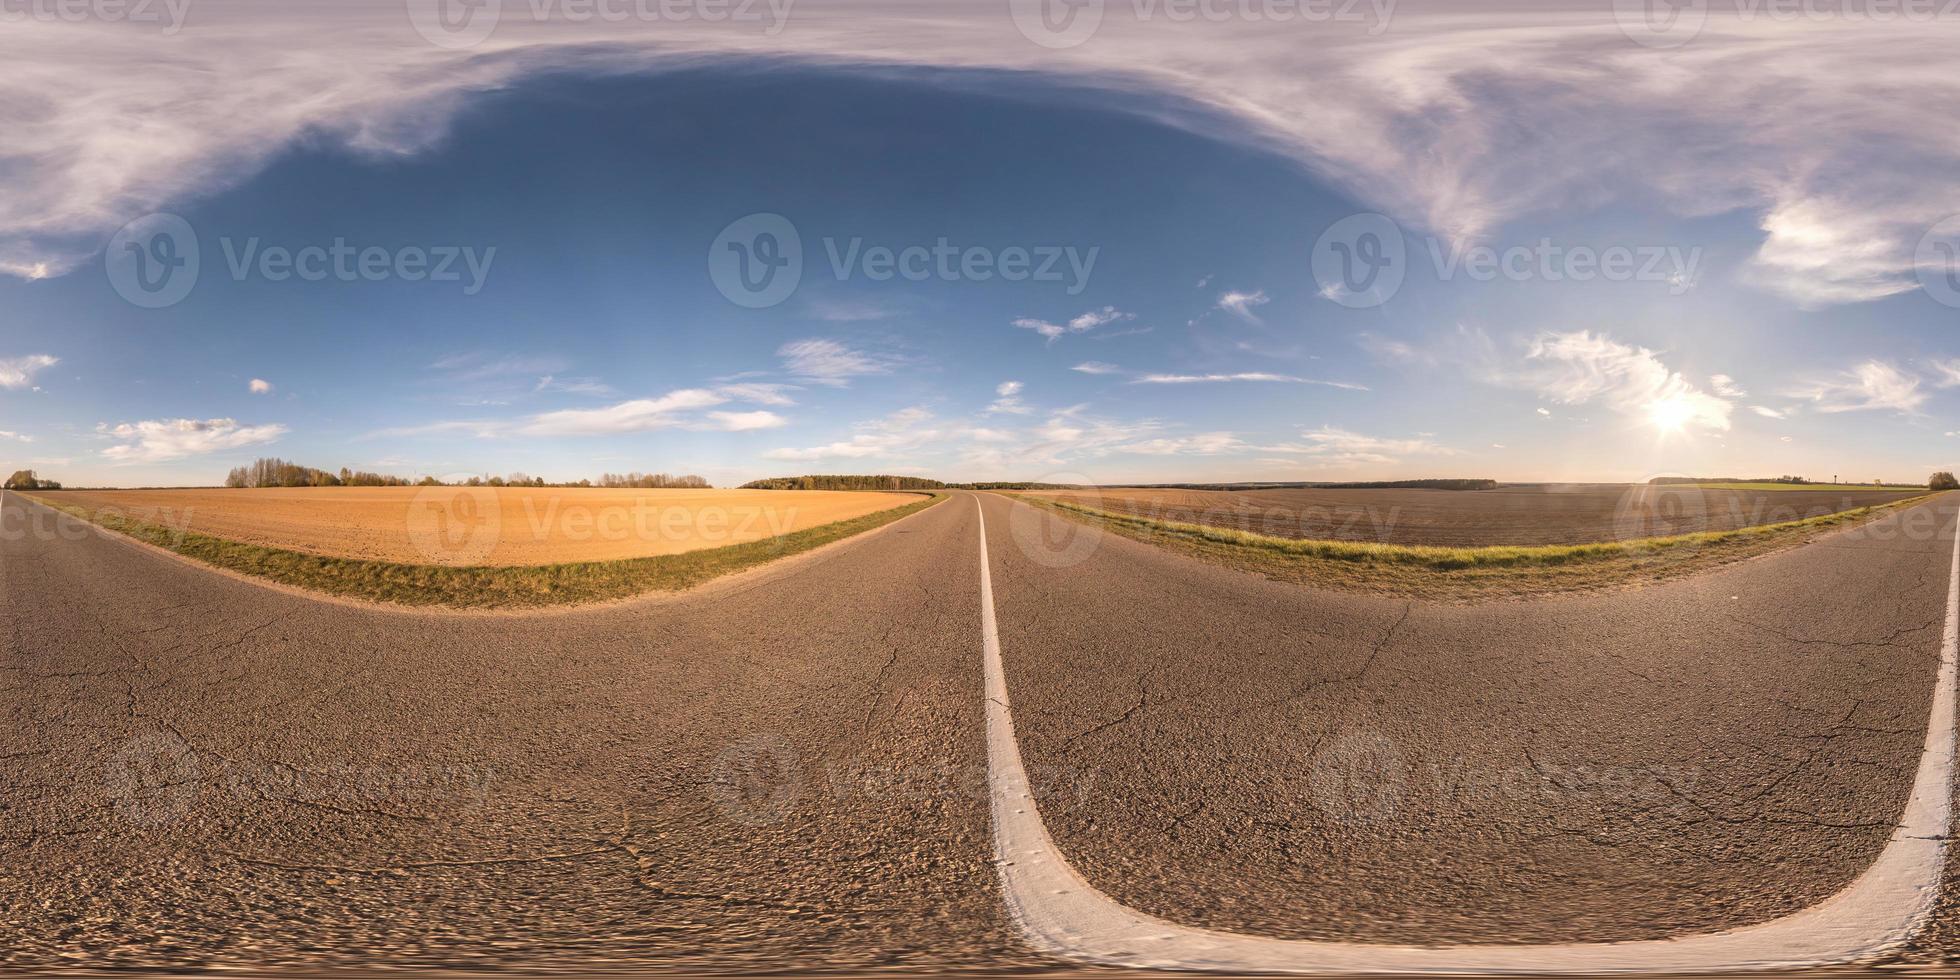 Full spherical seamless hdri panorama 360 degrees angle view on no traffic asphalt road among fields in spring day with cloudy evening in equirectangular projection, VR AR content photo